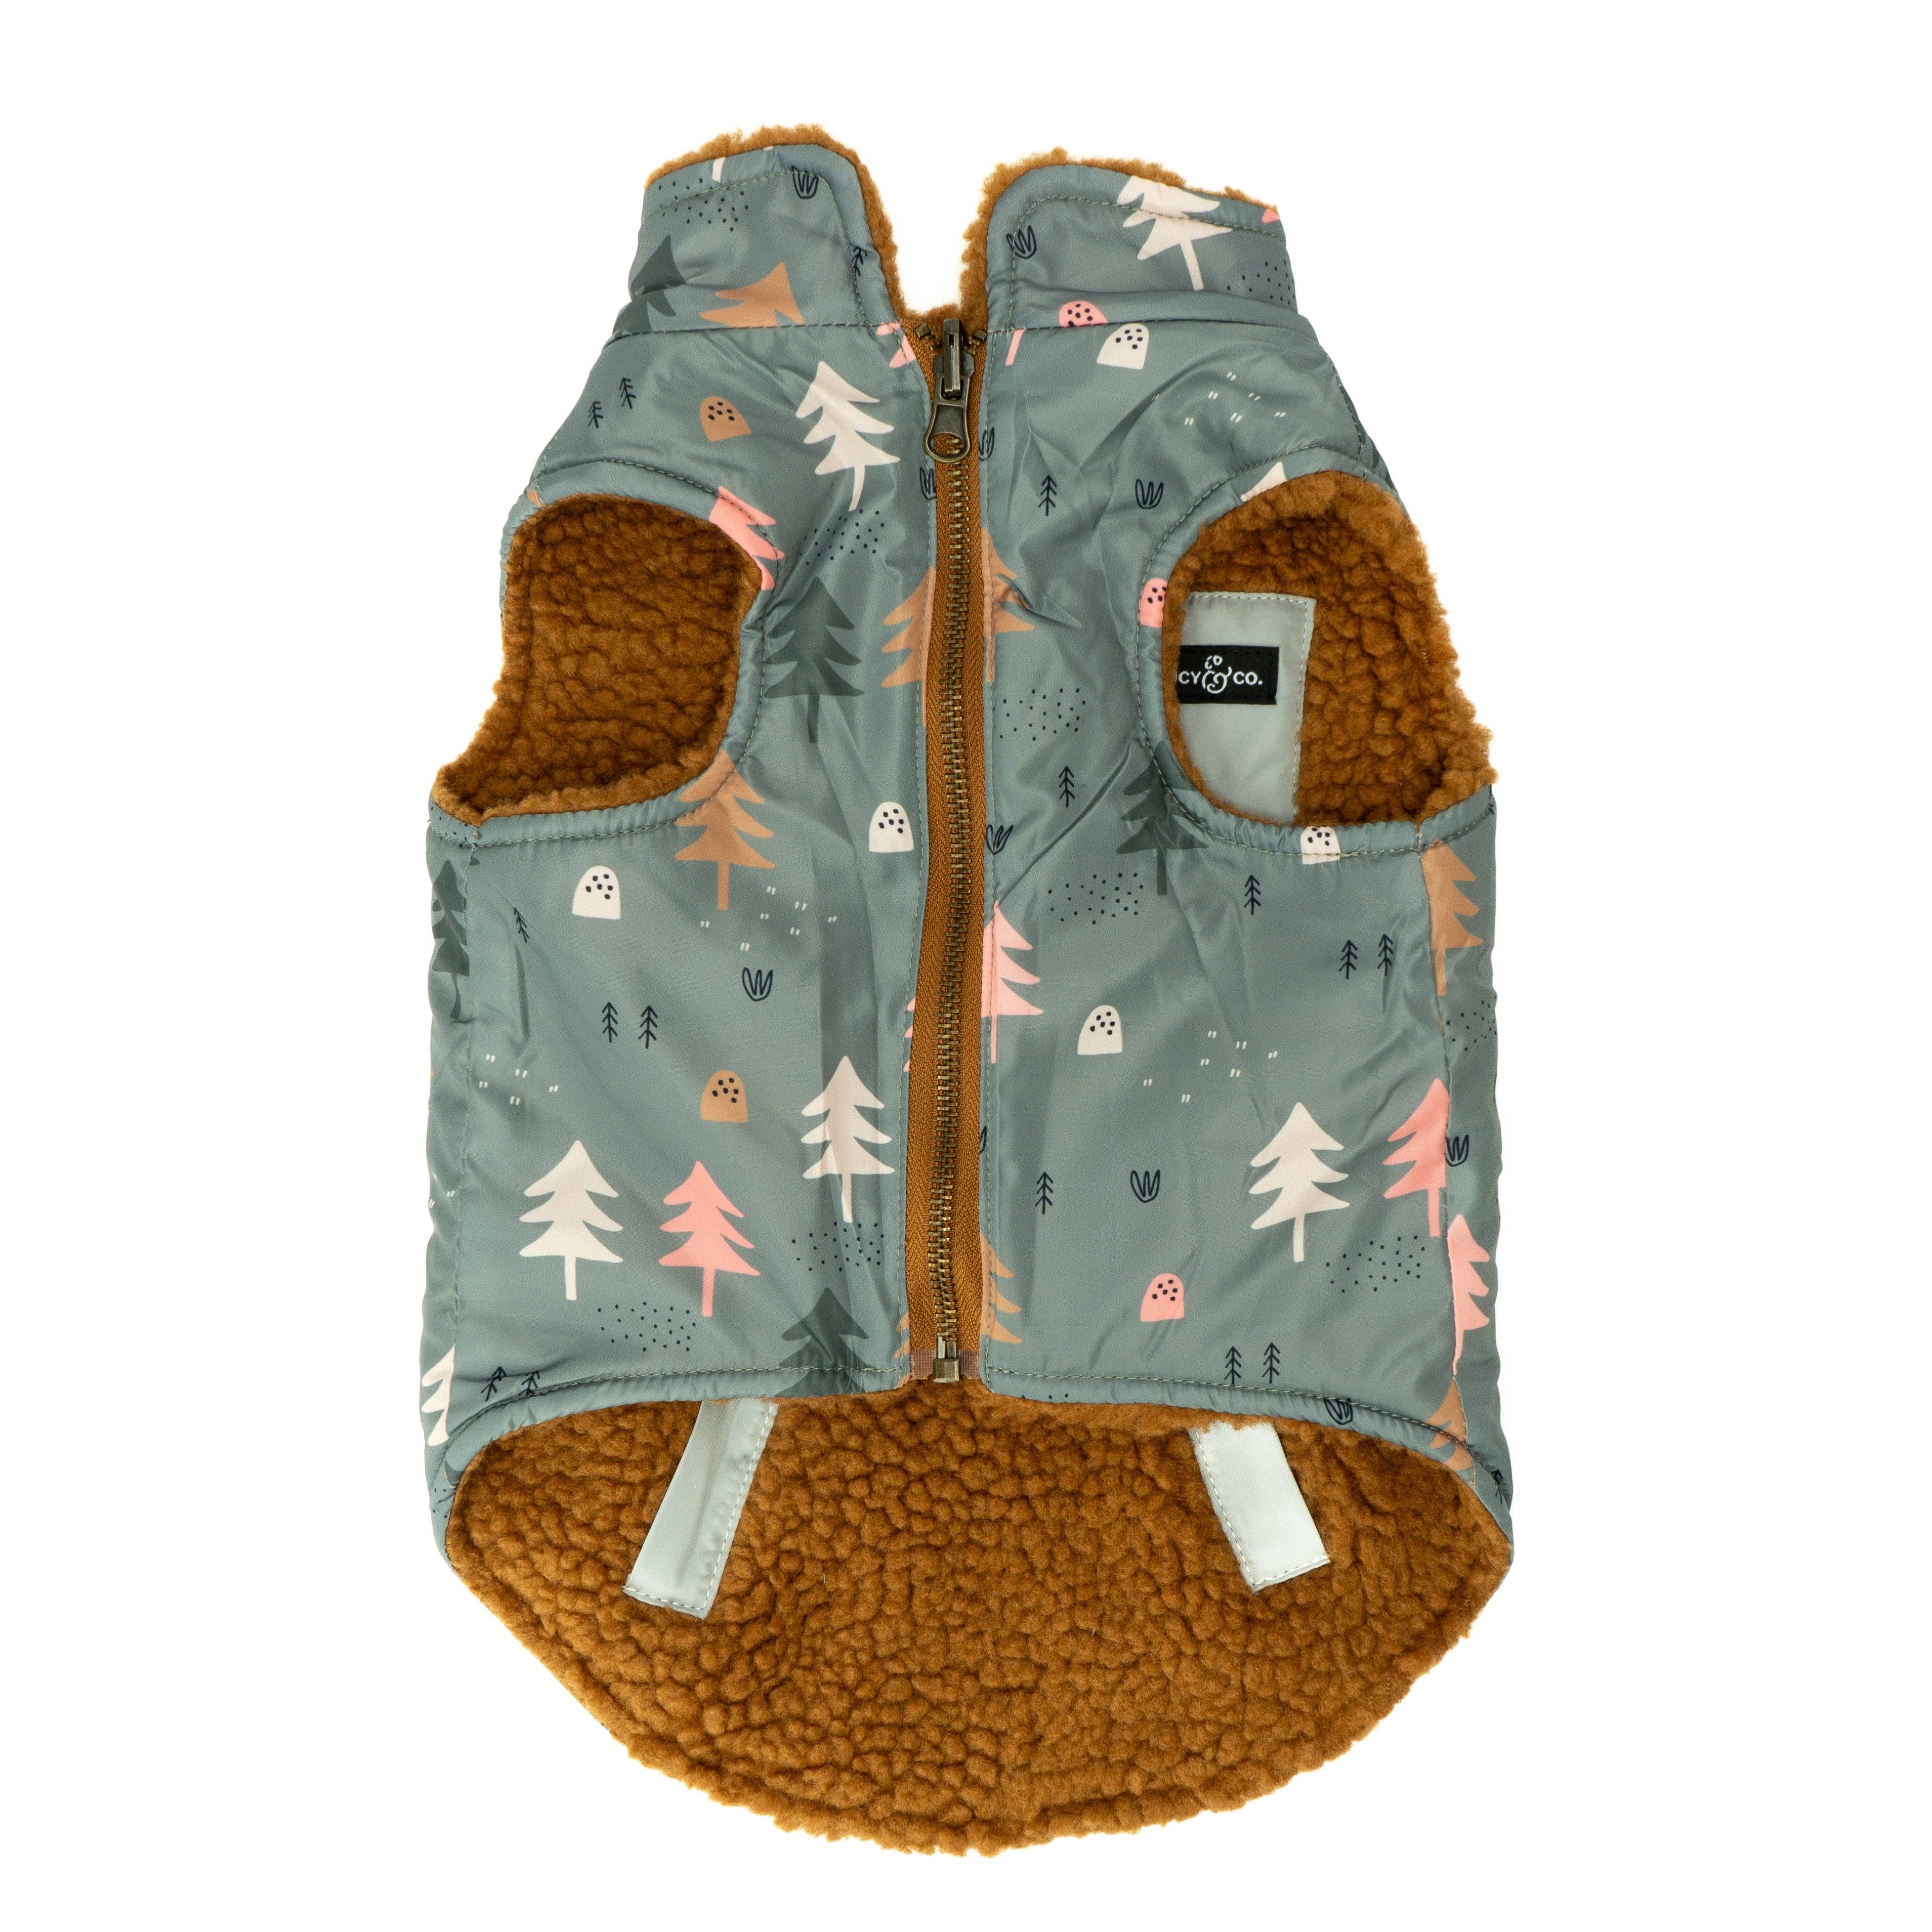 The Take a Hike Reversible Teddy Vest: Large